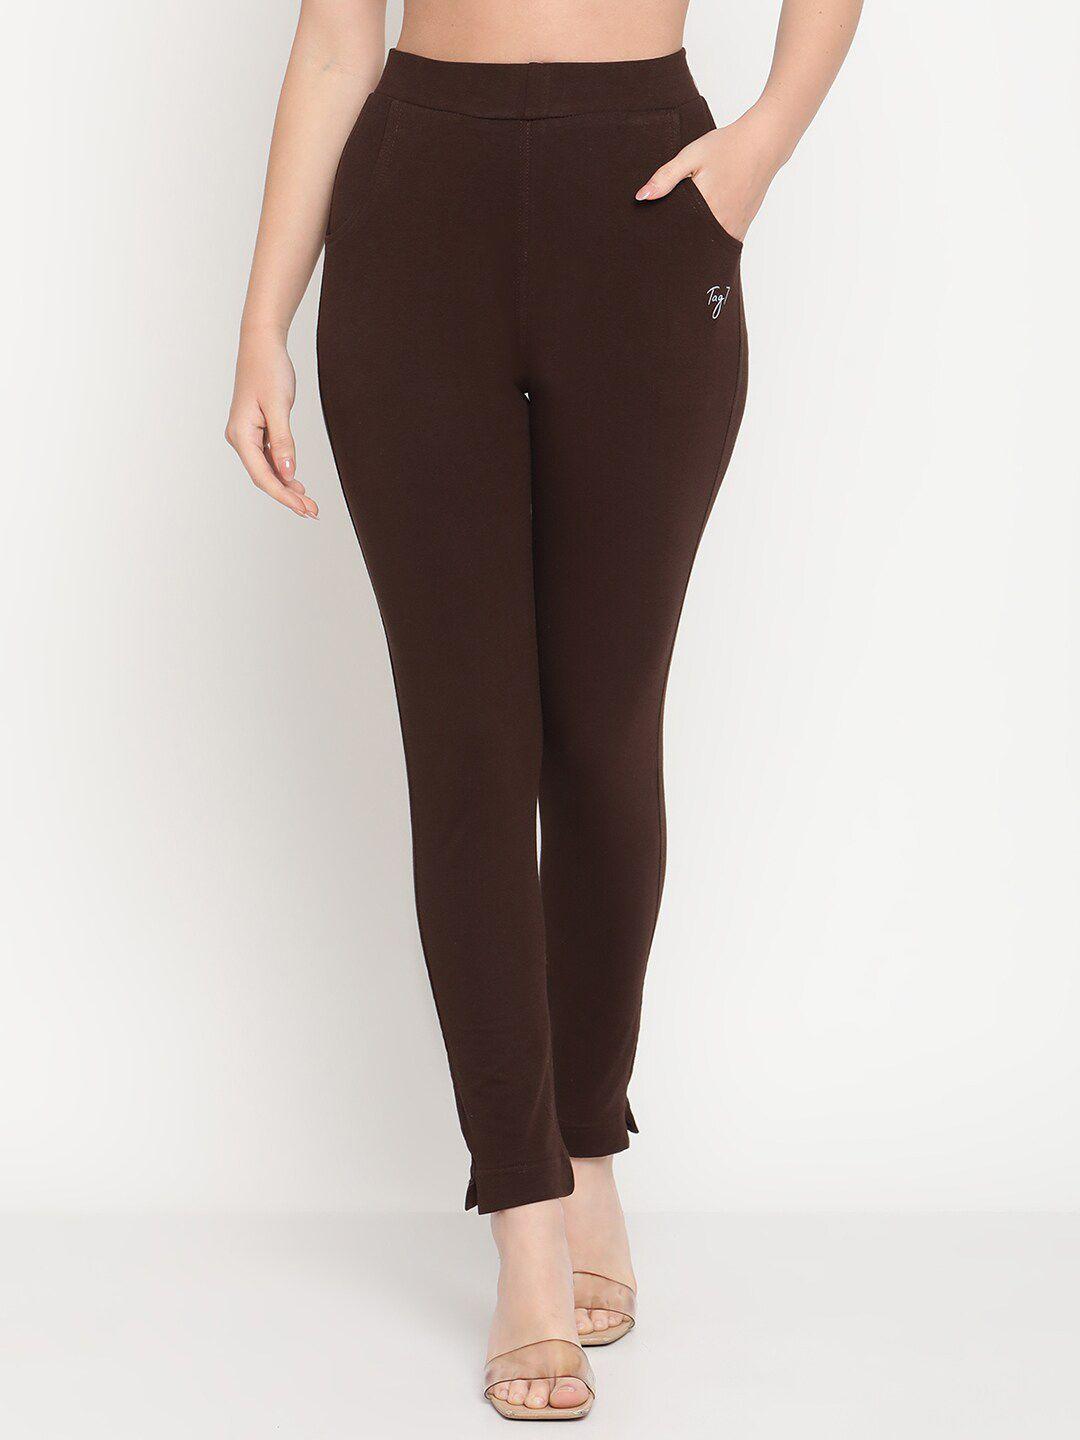 tag 7 women brown solid ankle length jeggings